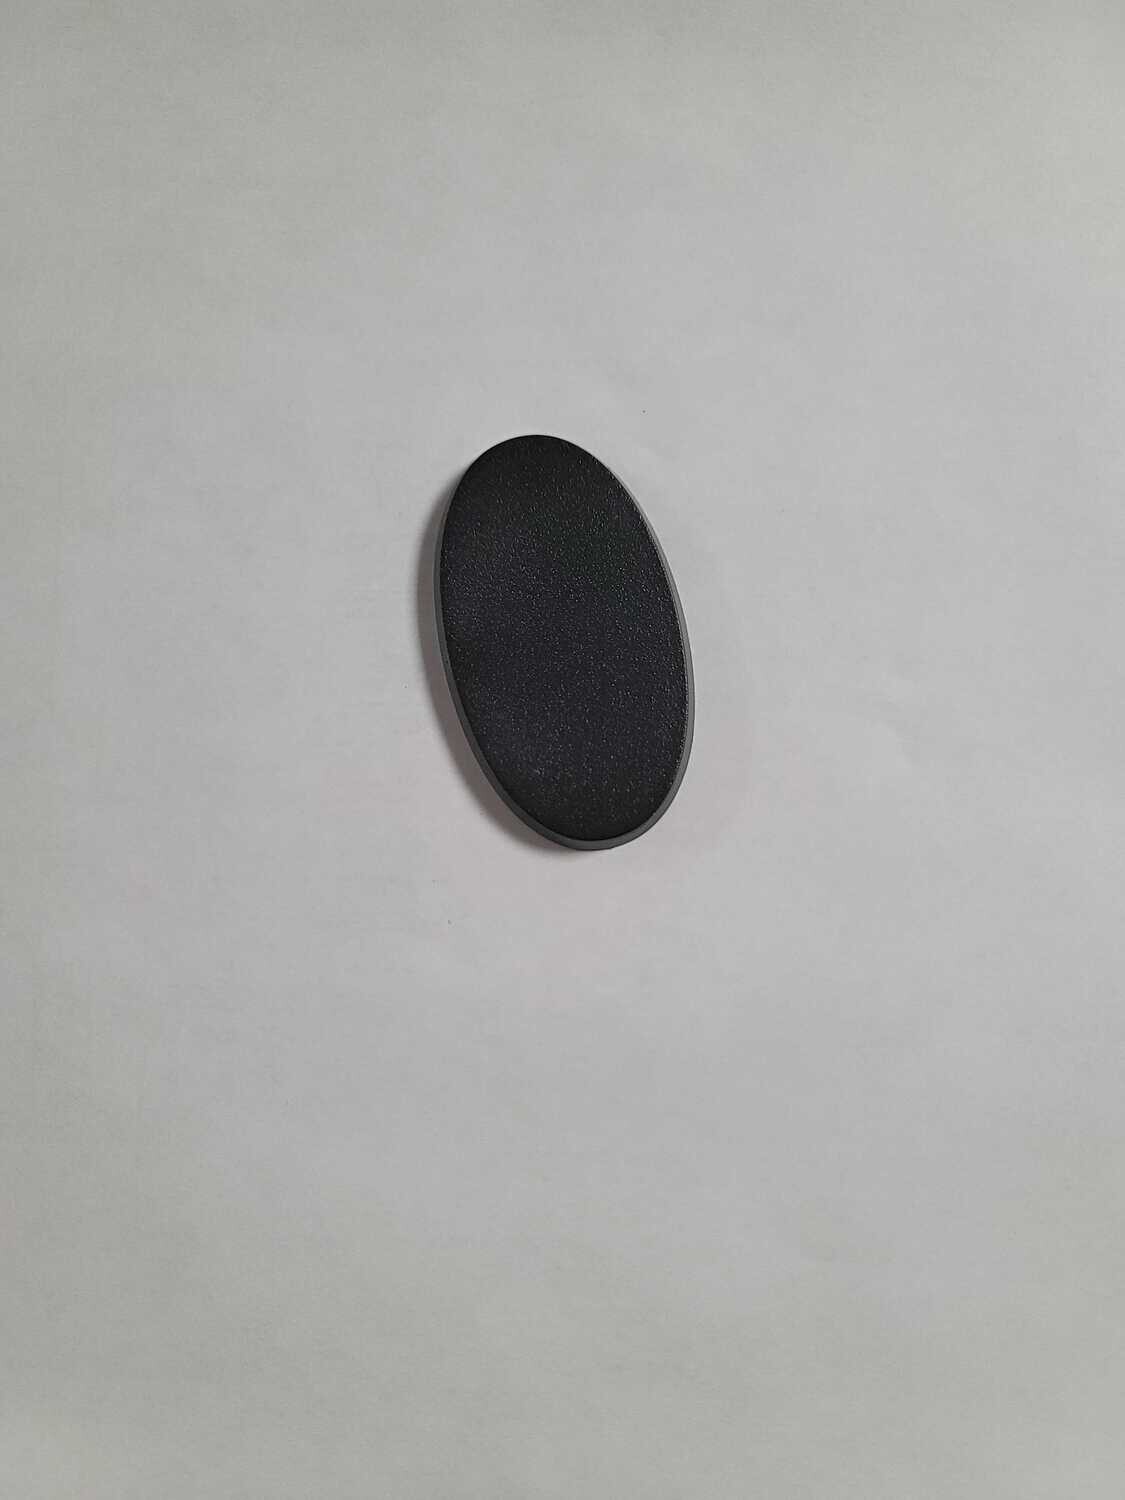 60mm x 35mm Oval Beveled Bases